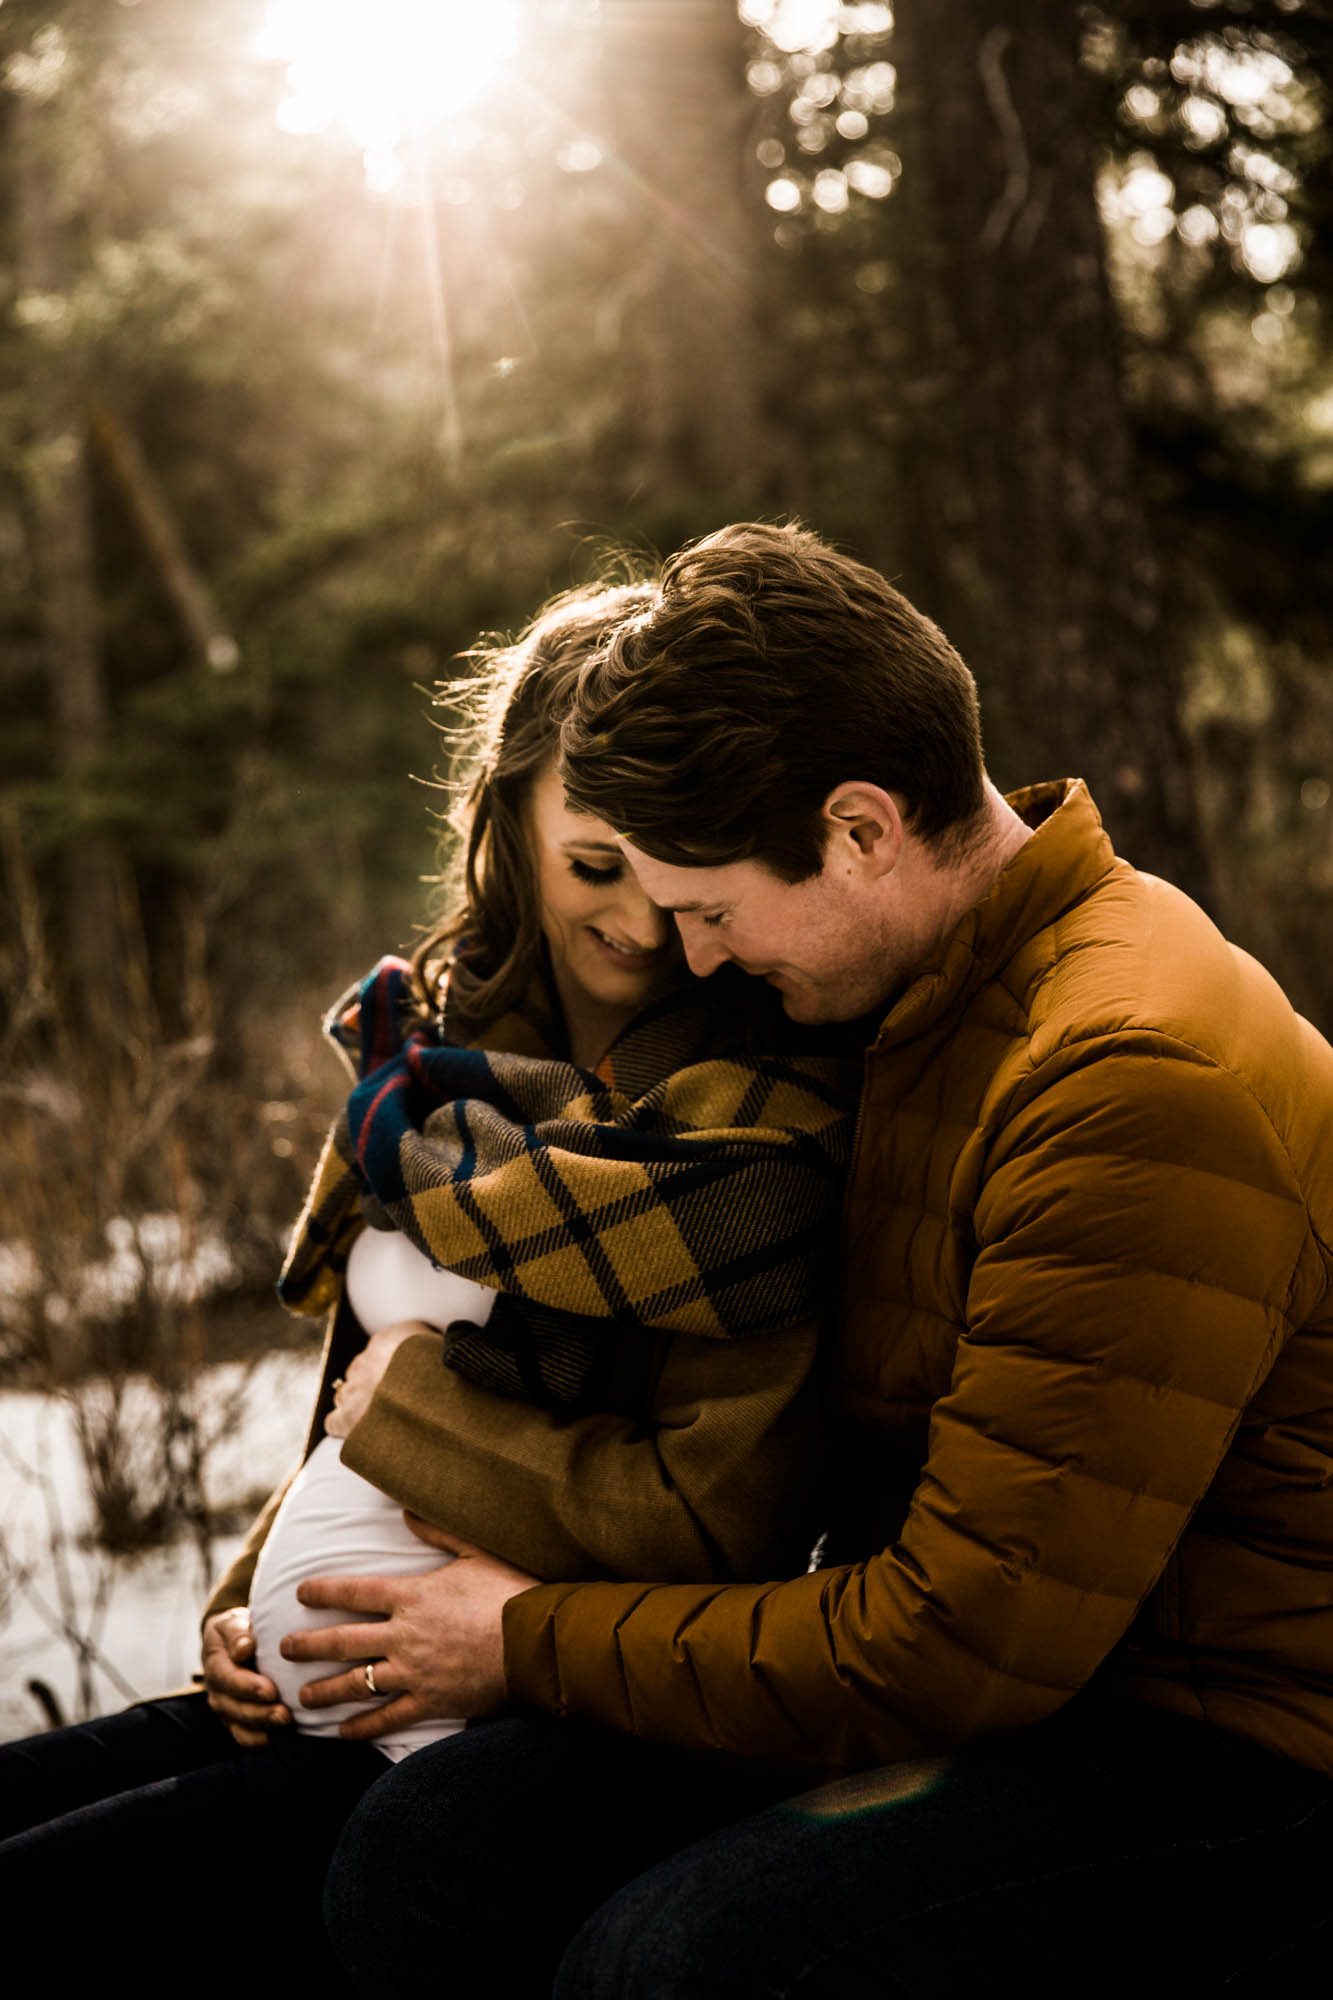 Calgary maternity and newborn photographer, winter maternity photos in Kananaskis Country in the mountains